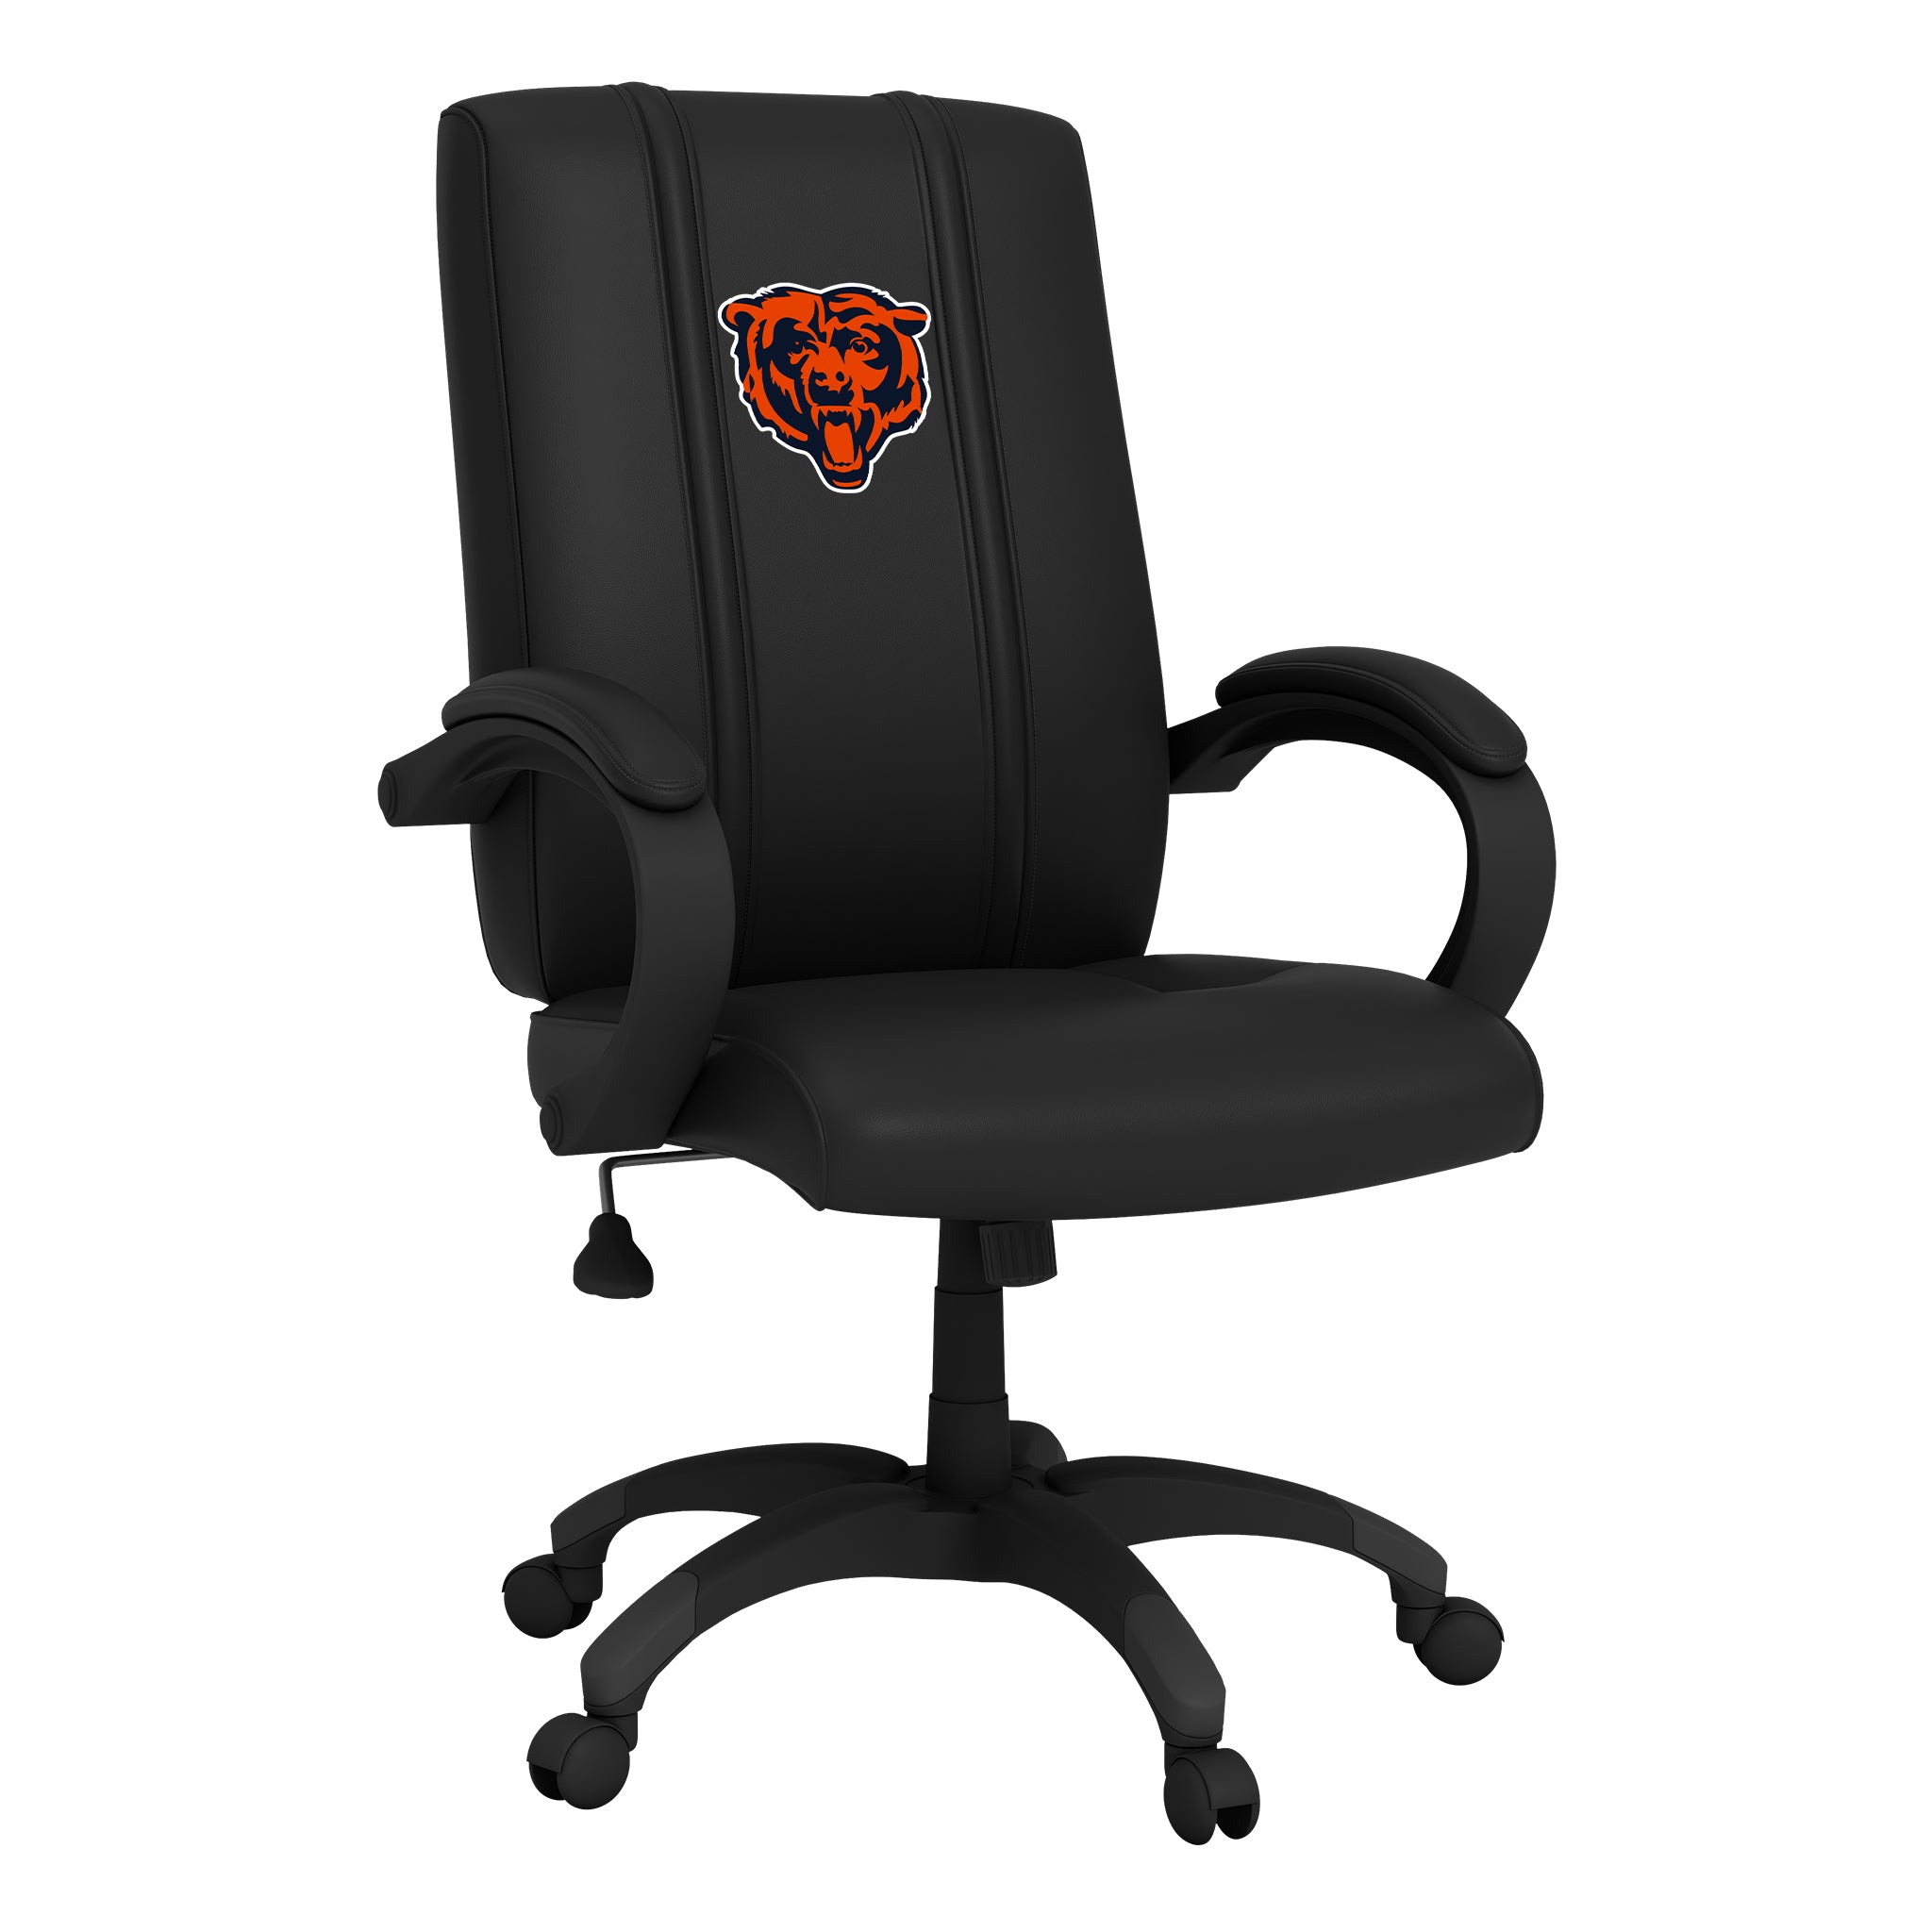 Chicago Bears Office Chair 1000